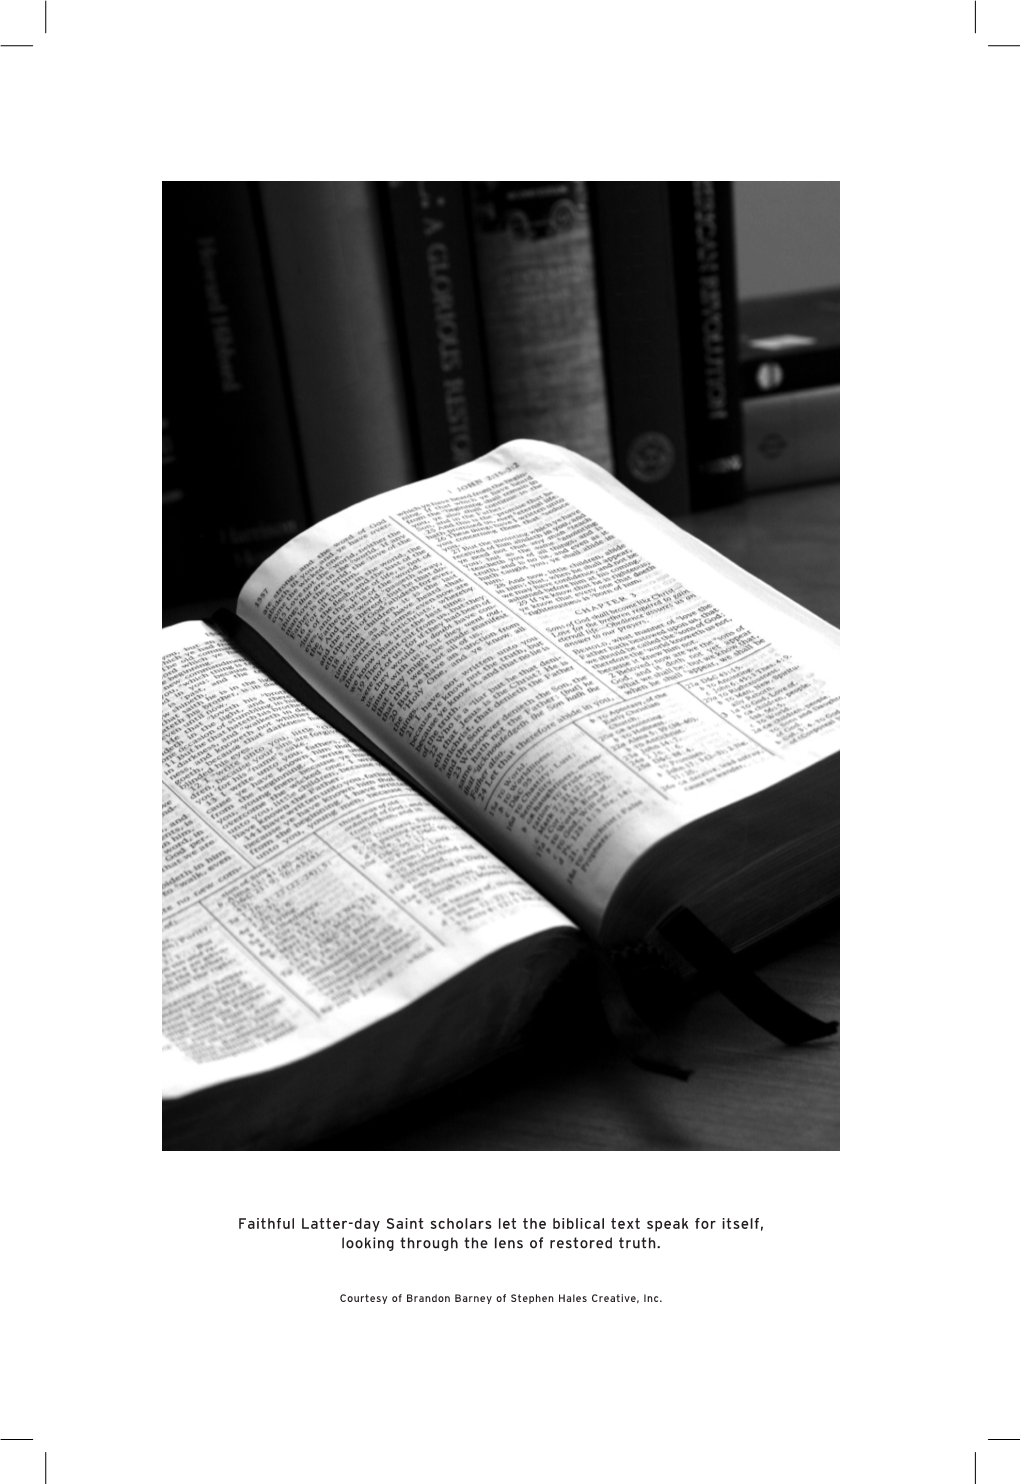 Faithful Latter-Day Saint Scholars Let the Biblical Text Speak for Itself, Looking Through the Lens of Restored Truth